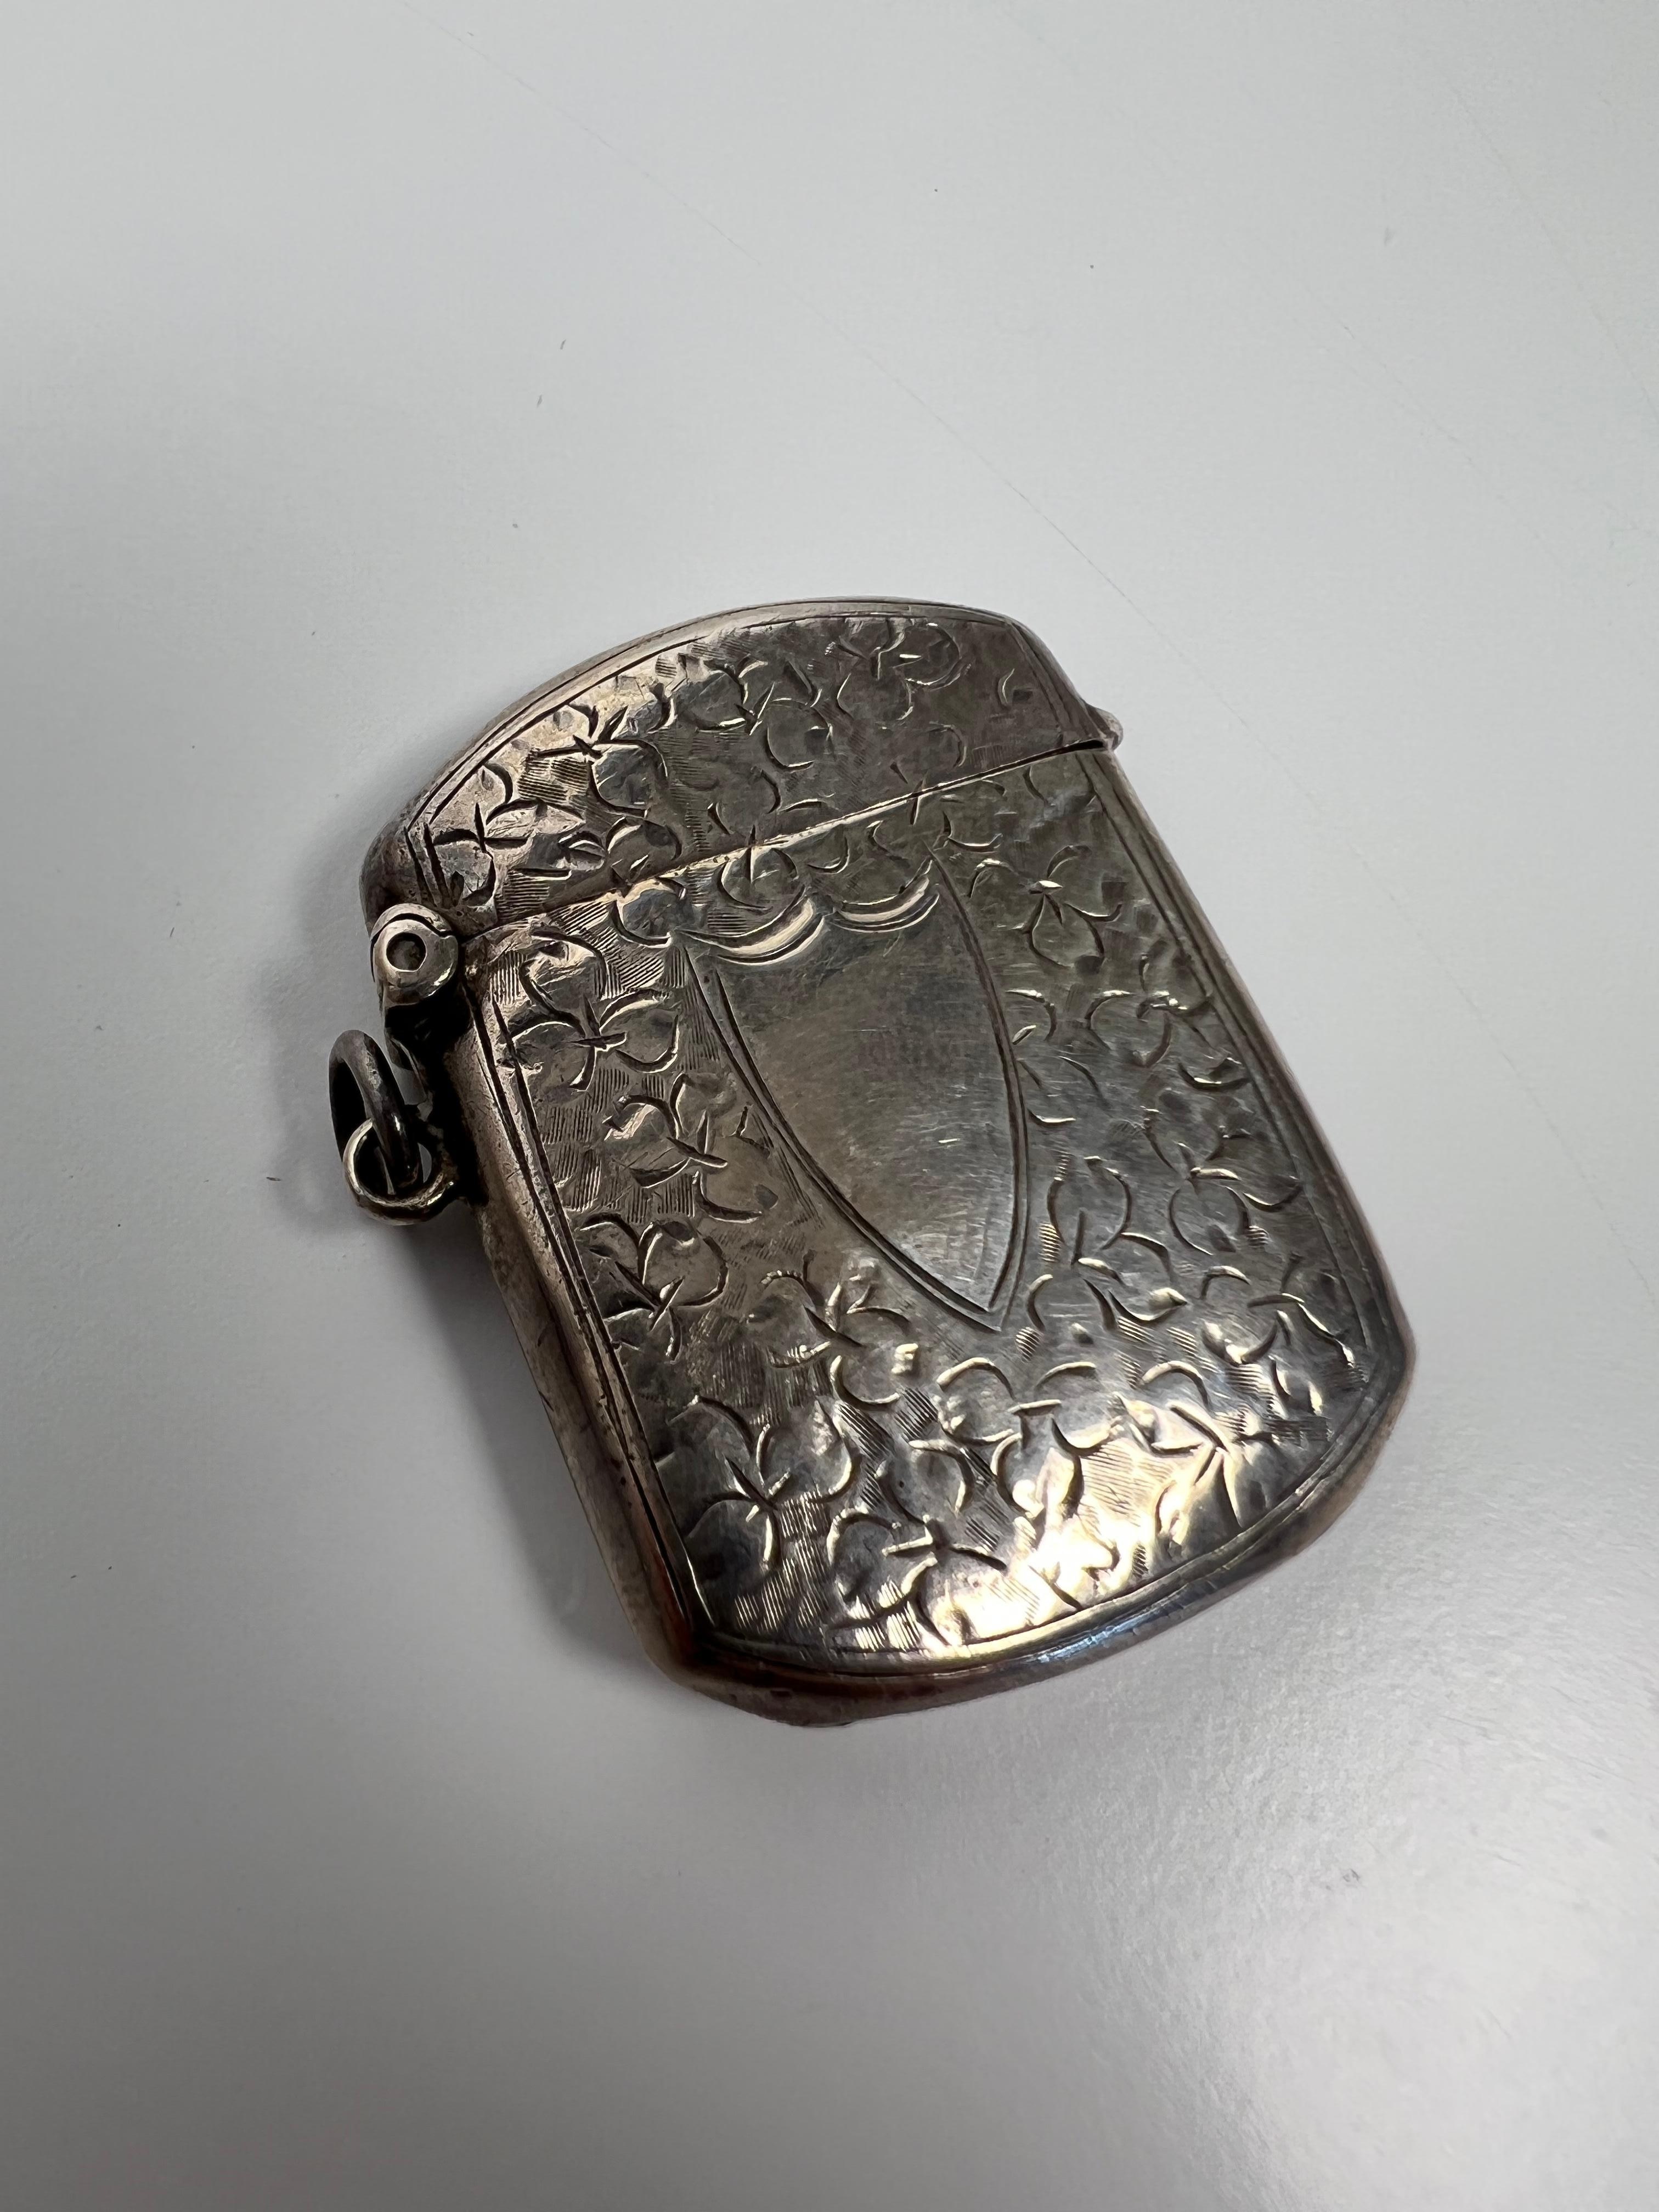 Early 20th century sterling silver match safe with beautiful repousse sides made by WSH Birmingham England. The silversmiths mark WSH is by William Henry Sparrow - H Williamson Ltd. This is a nice piece from a collector who traveled the world buying